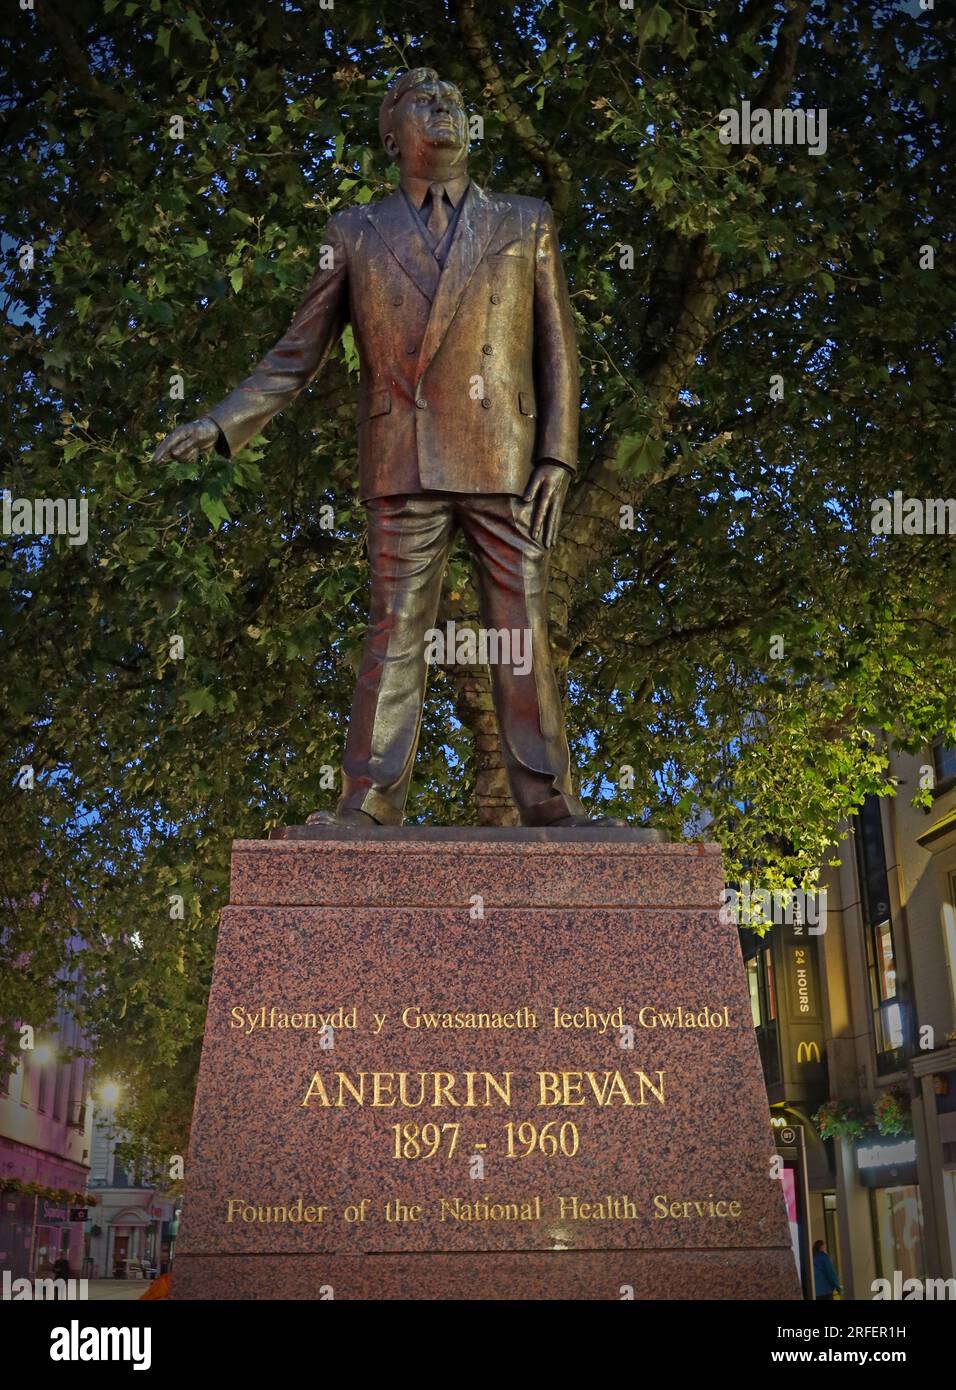 Statue of Aneurin Bevan, 1897-1960,Founder of the National Health Service NHS, by Robert Thomas, Queen Street, Cardiff, Wales, UK,CF10 2BU Stock Photo